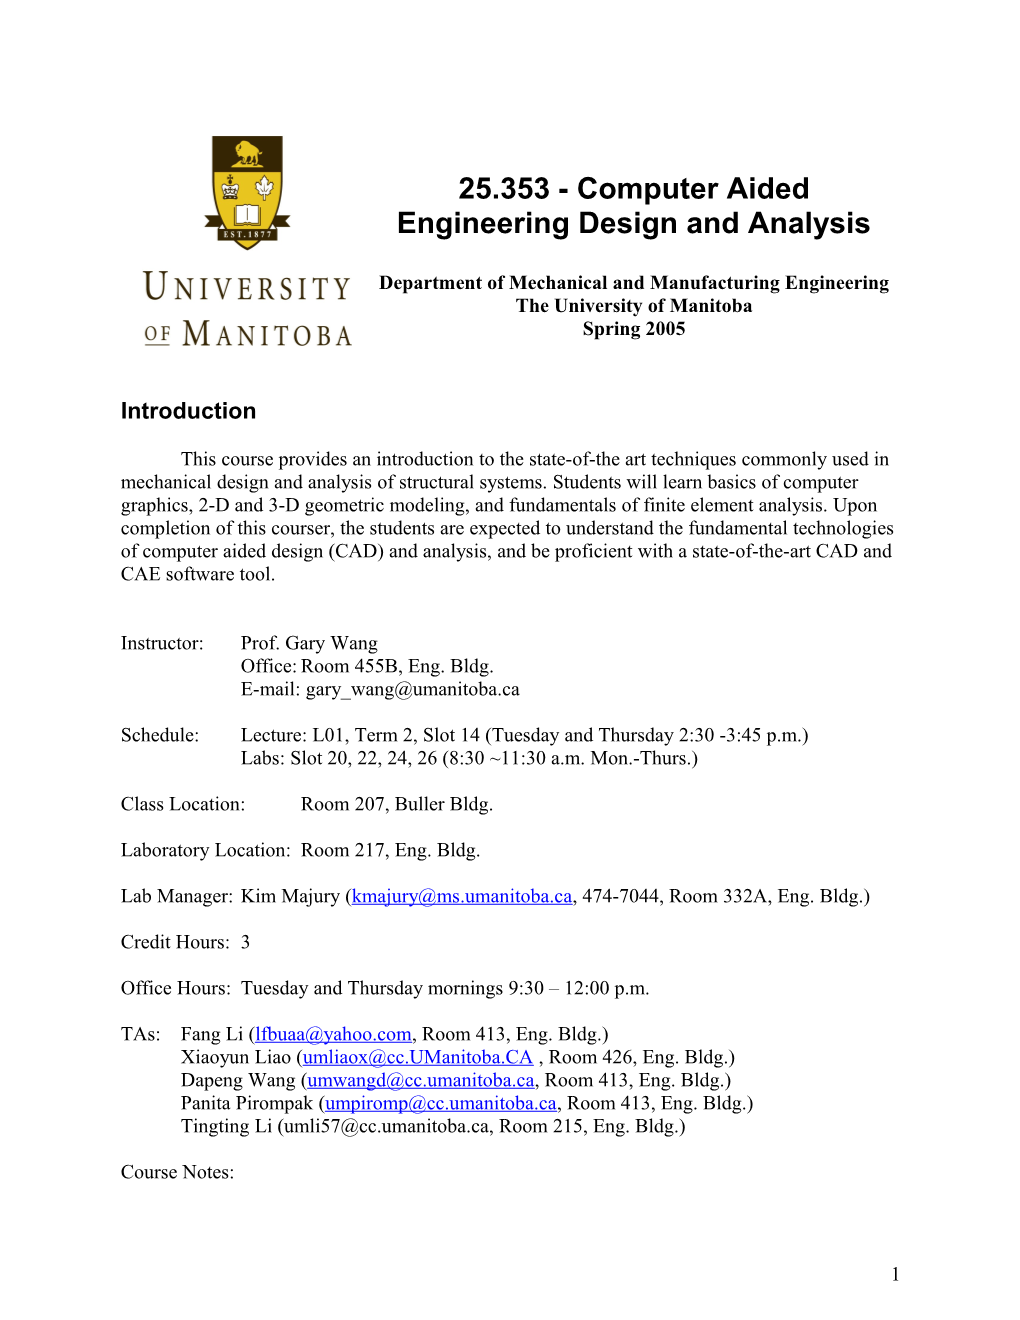 25.353 - Computer Aided Engineering Design and Analysis